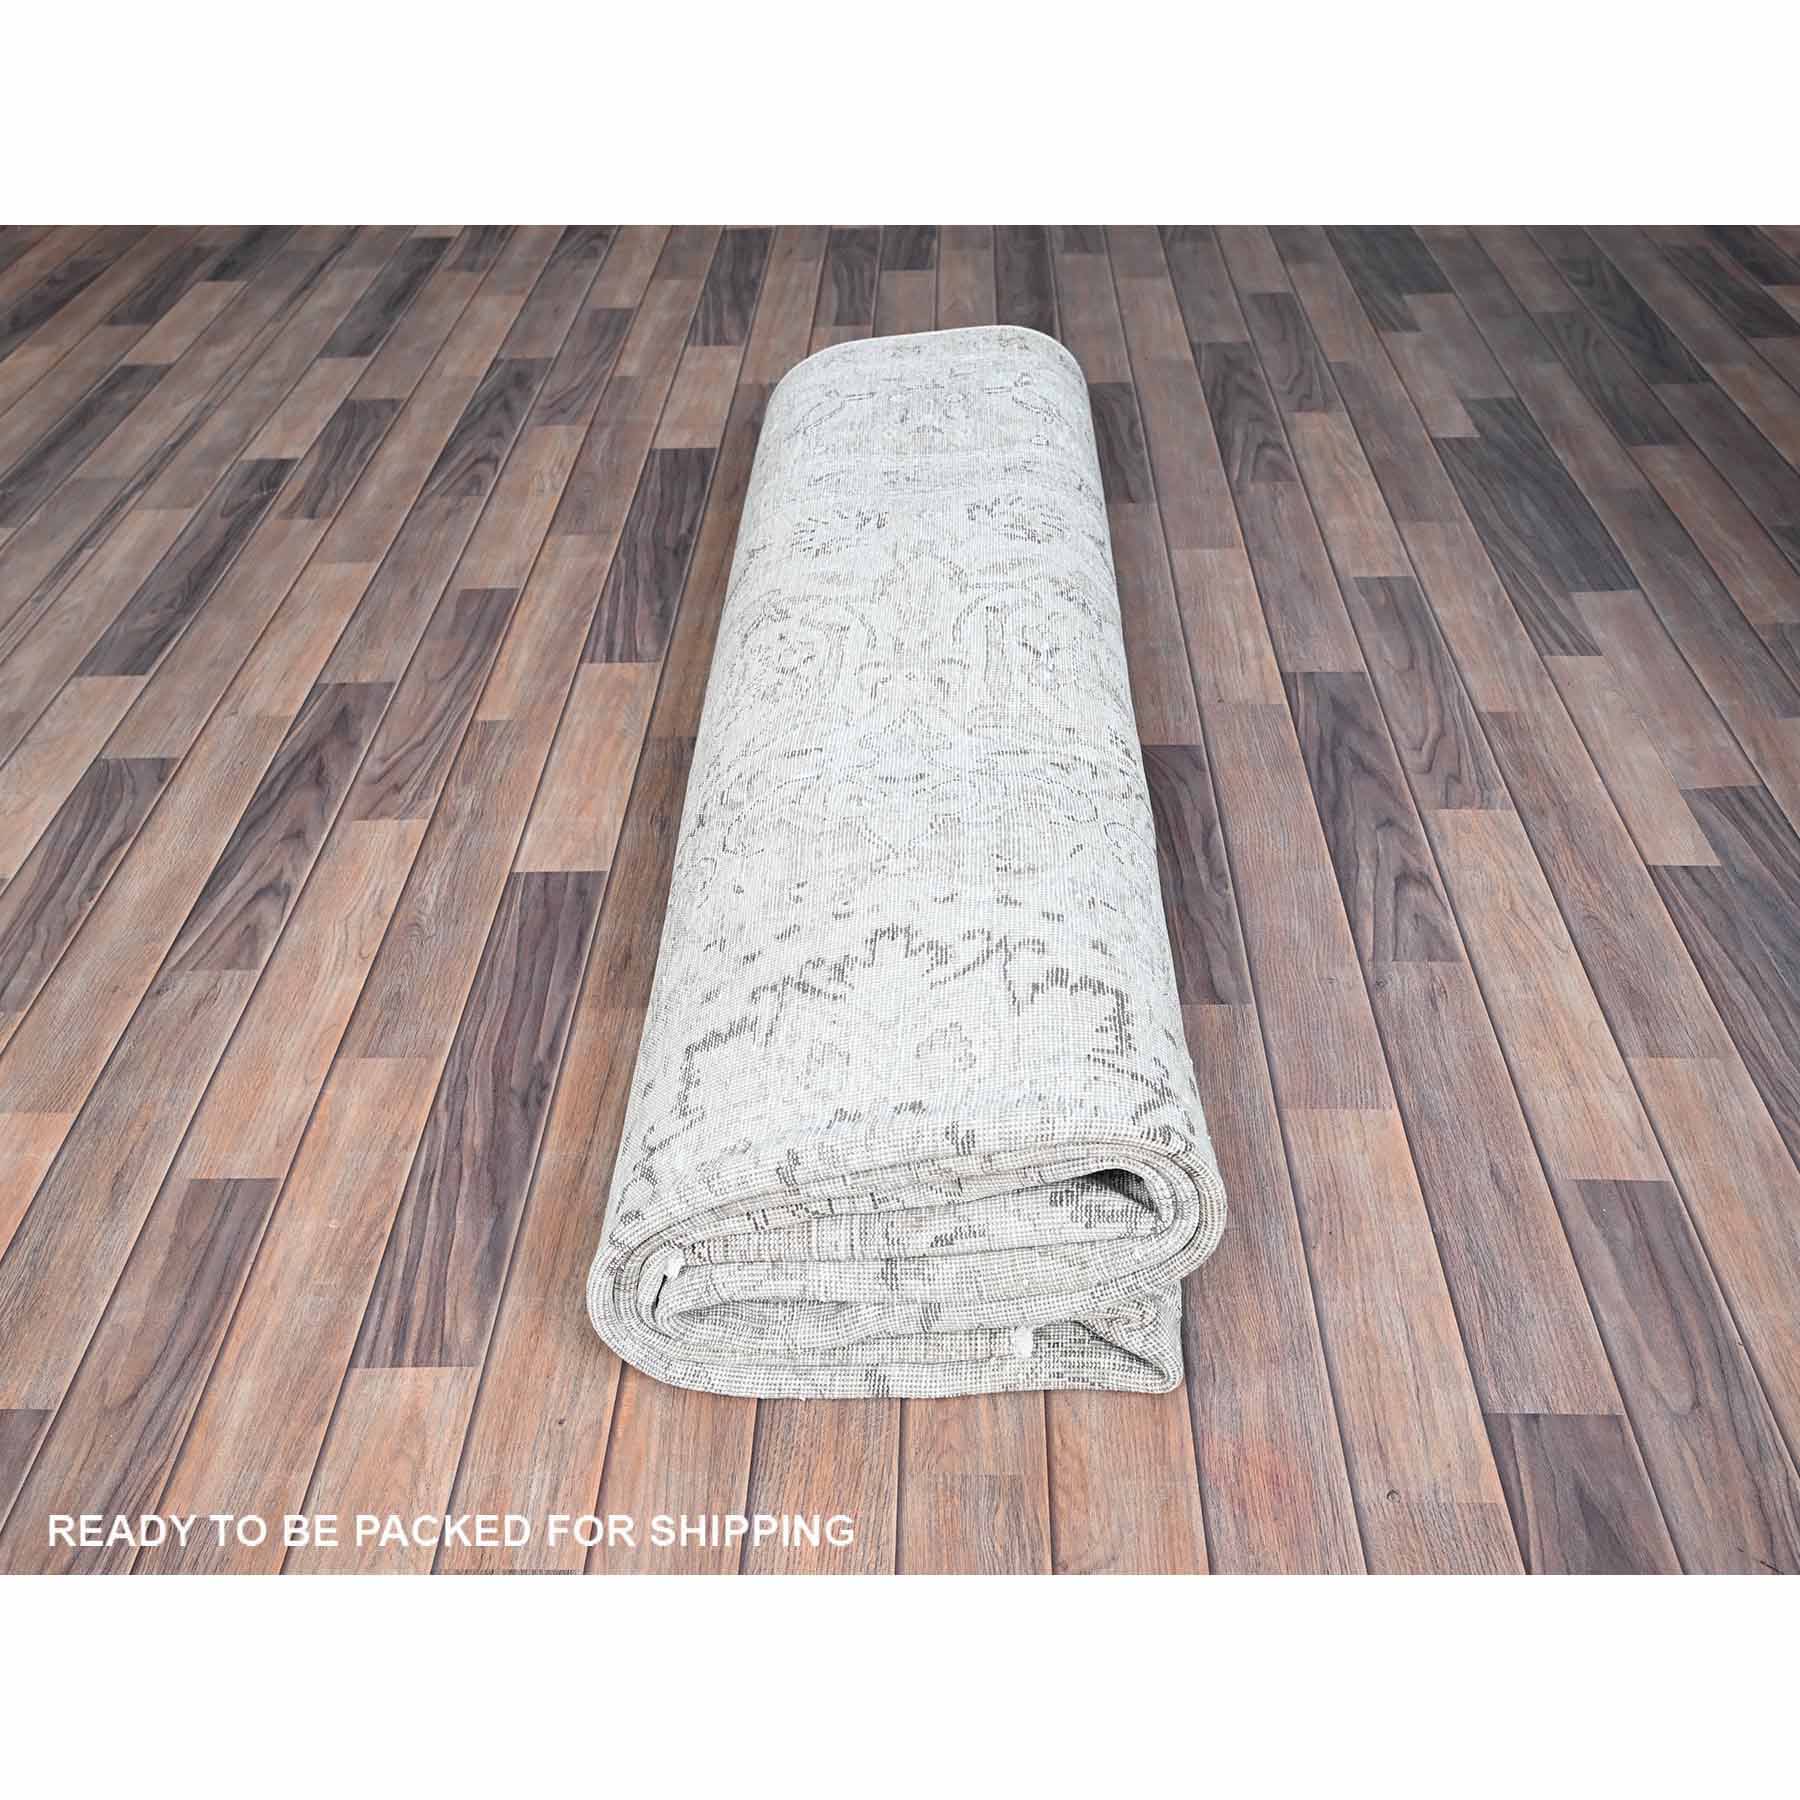 Overdyed-Vintage-Hand-Knotted-Rug-430960